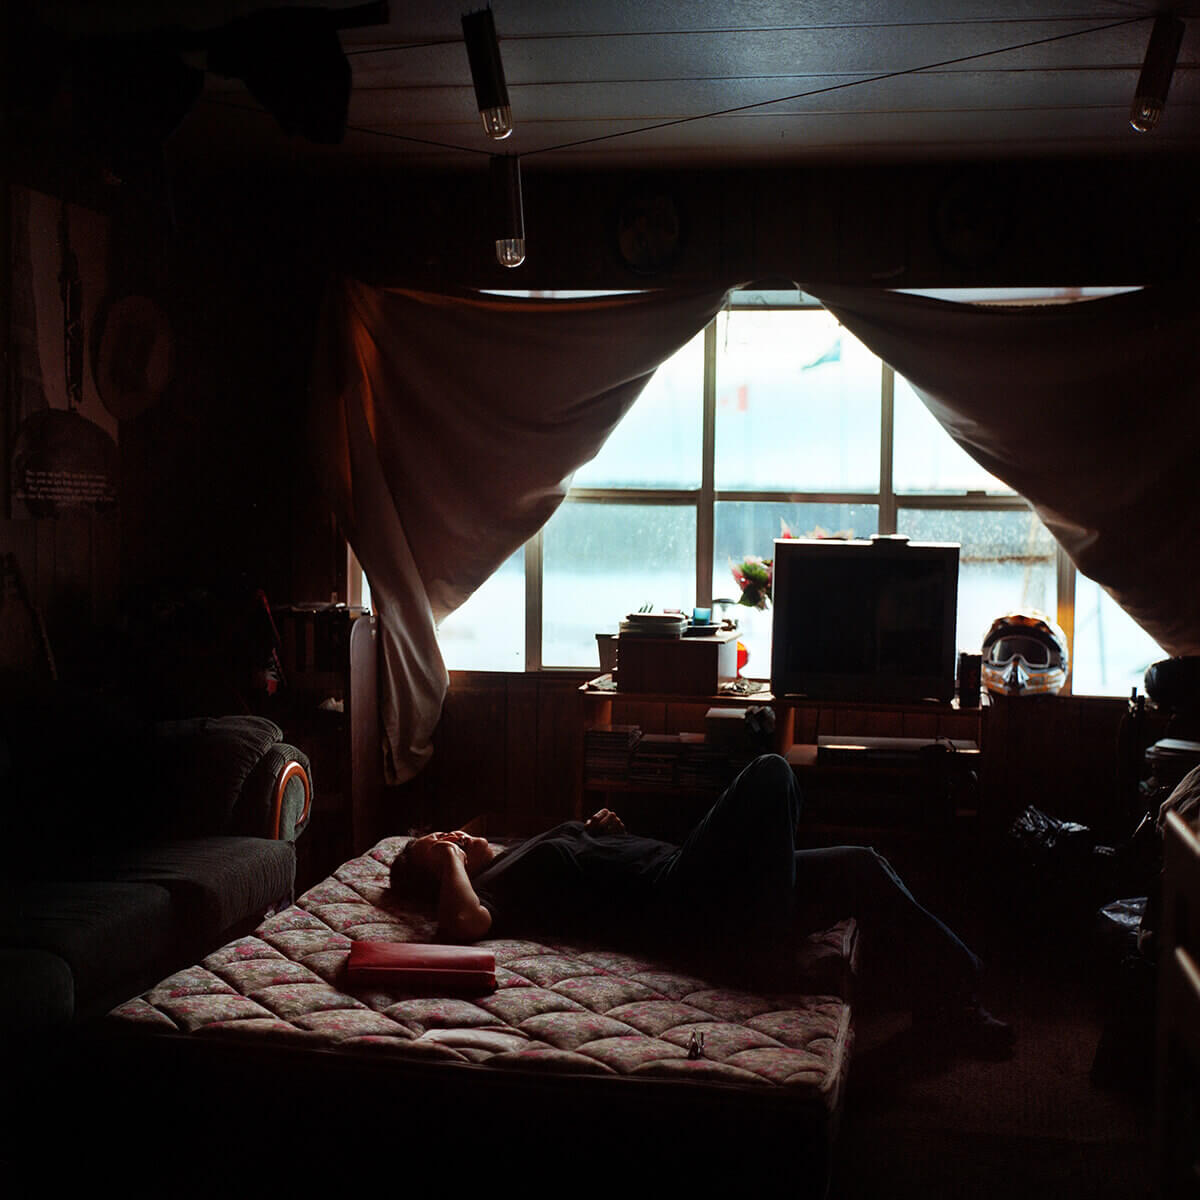 A photo of a Cree truck driver resting on a bare mattress in a cabin.